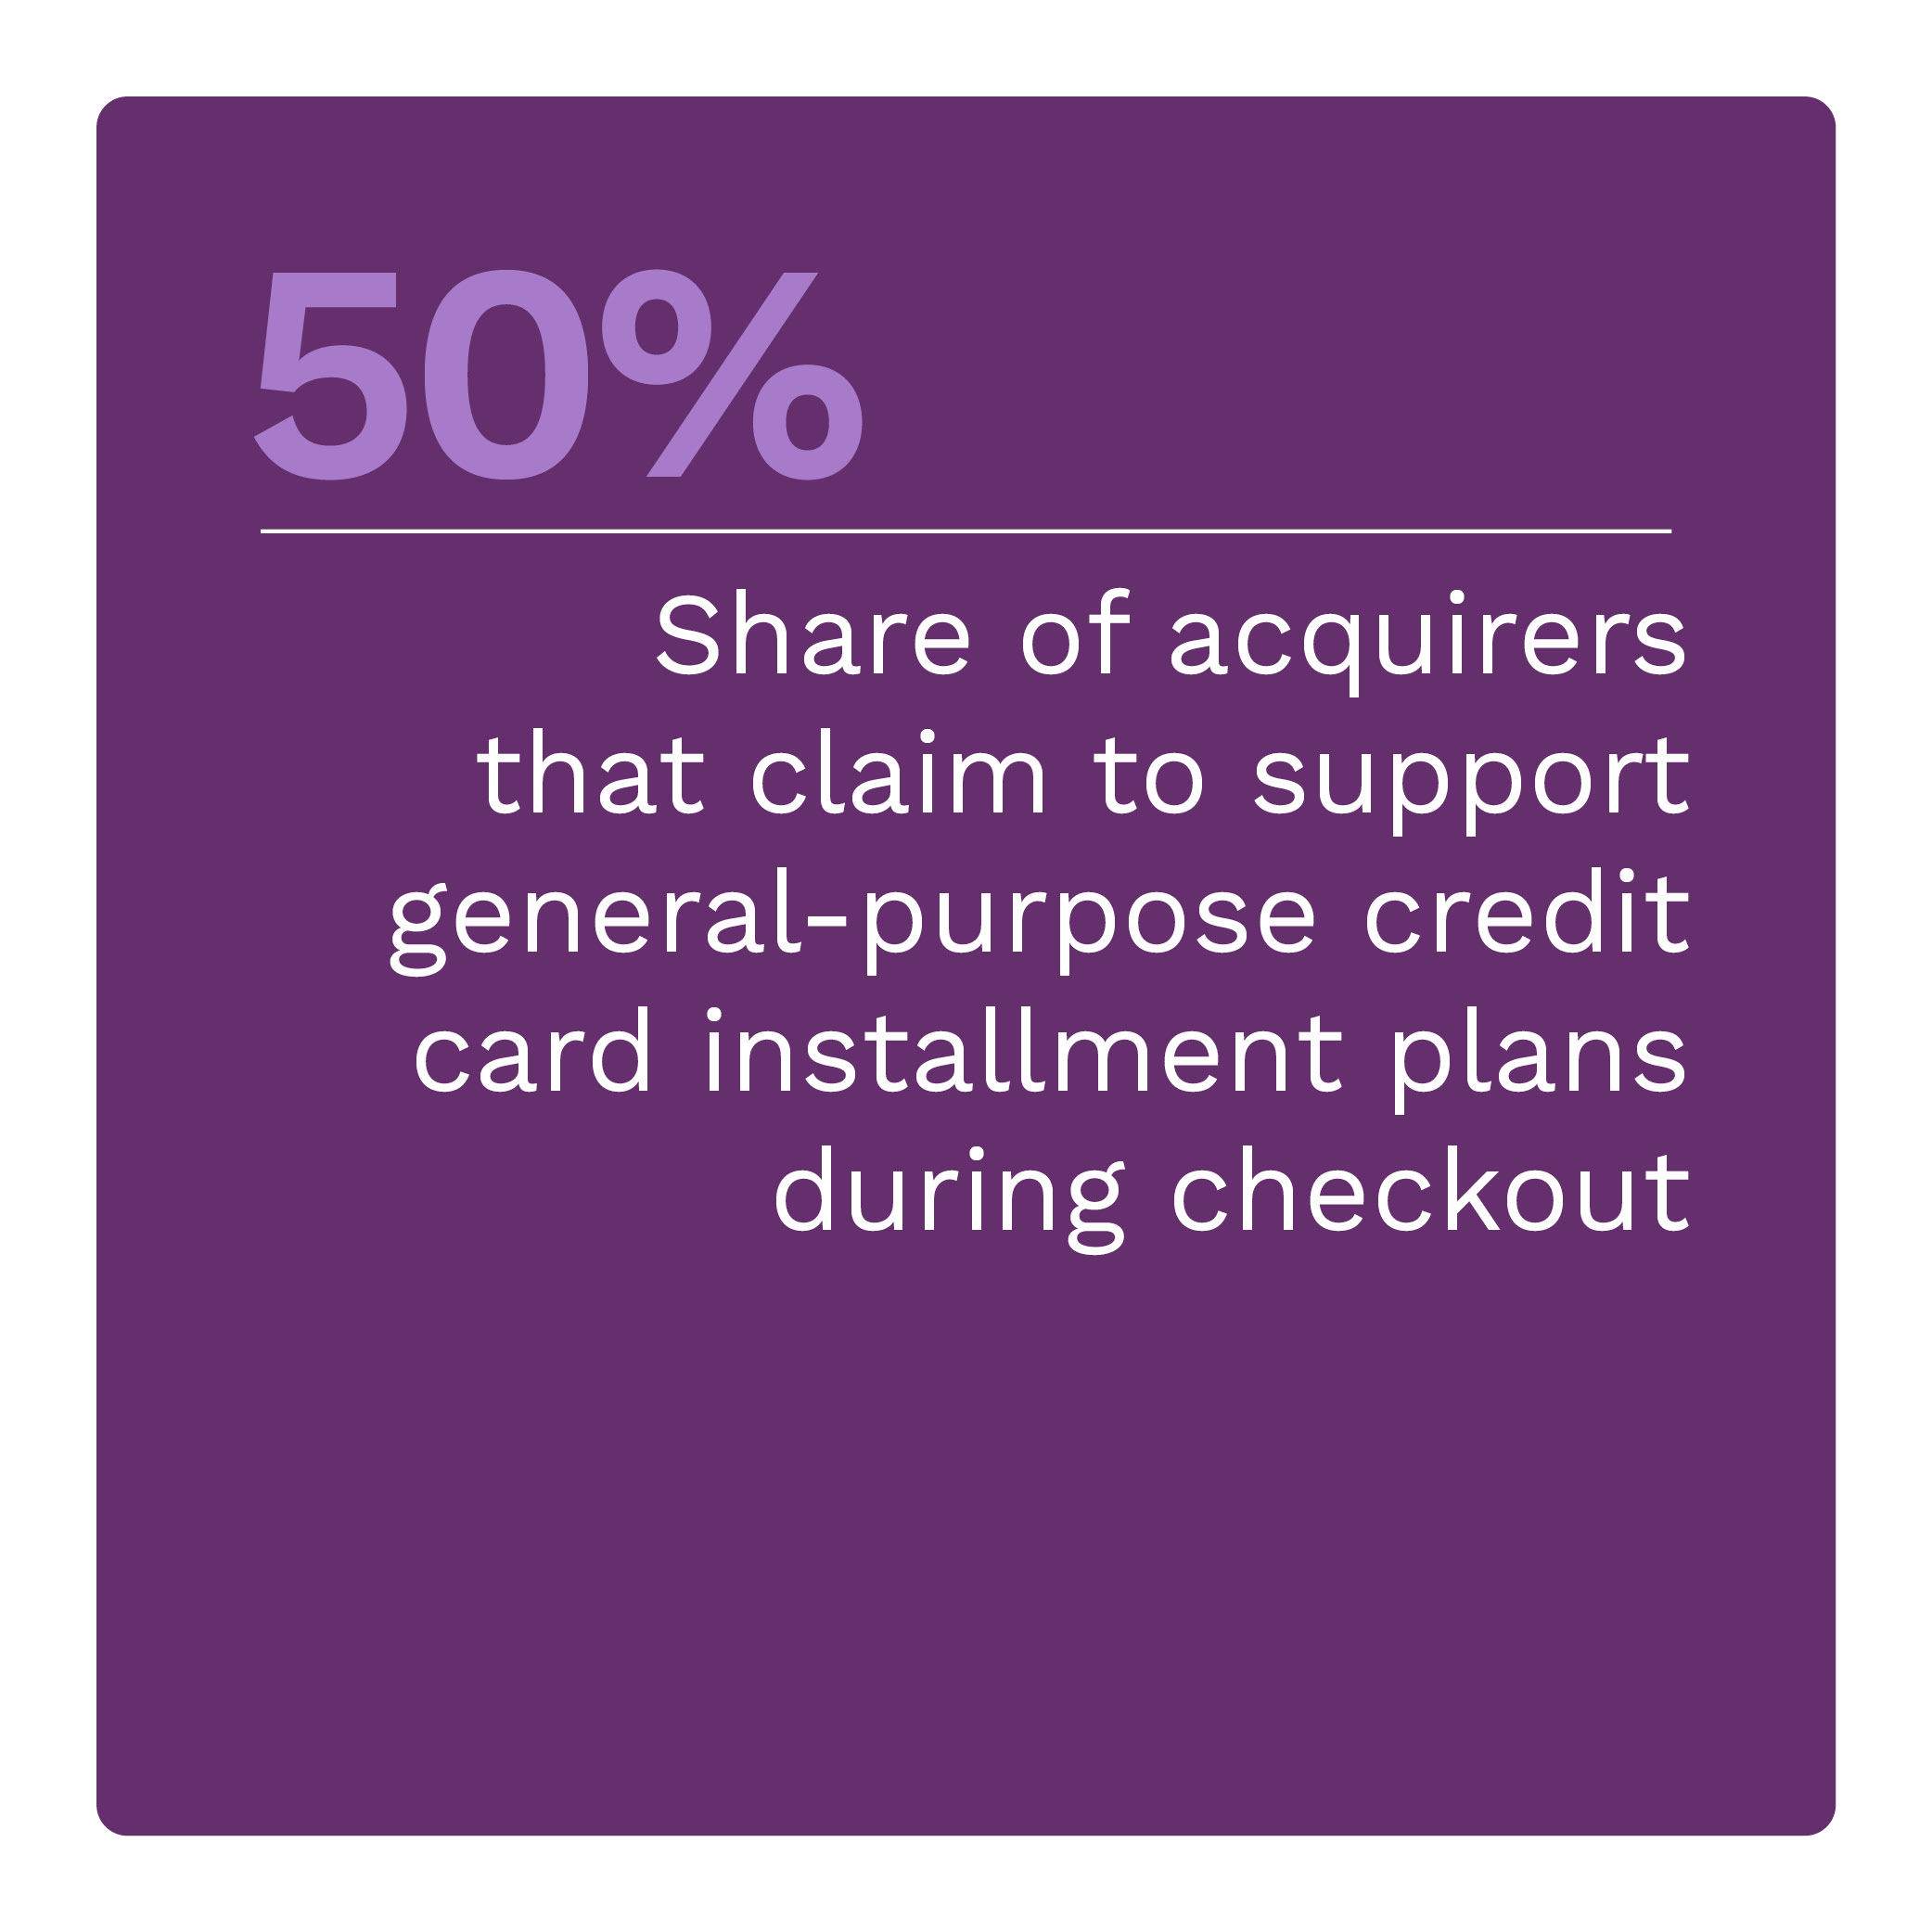 50%: Share of acquirers that claim to support general-purpose credit card installment plans during checkout